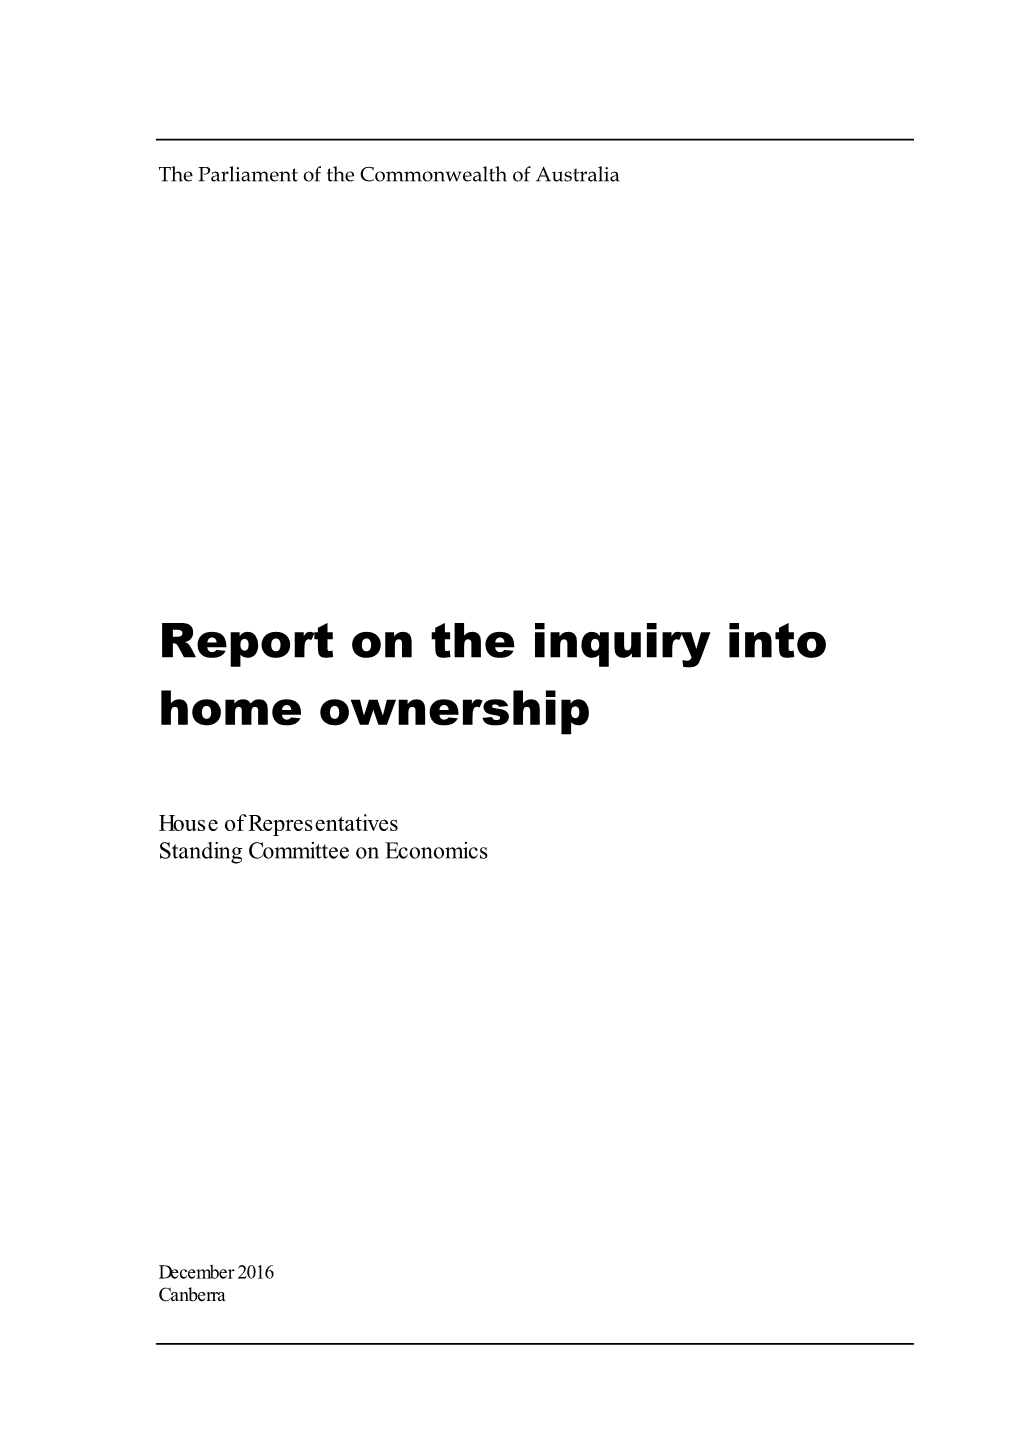 Report on the Inquiry Into Home Ownership